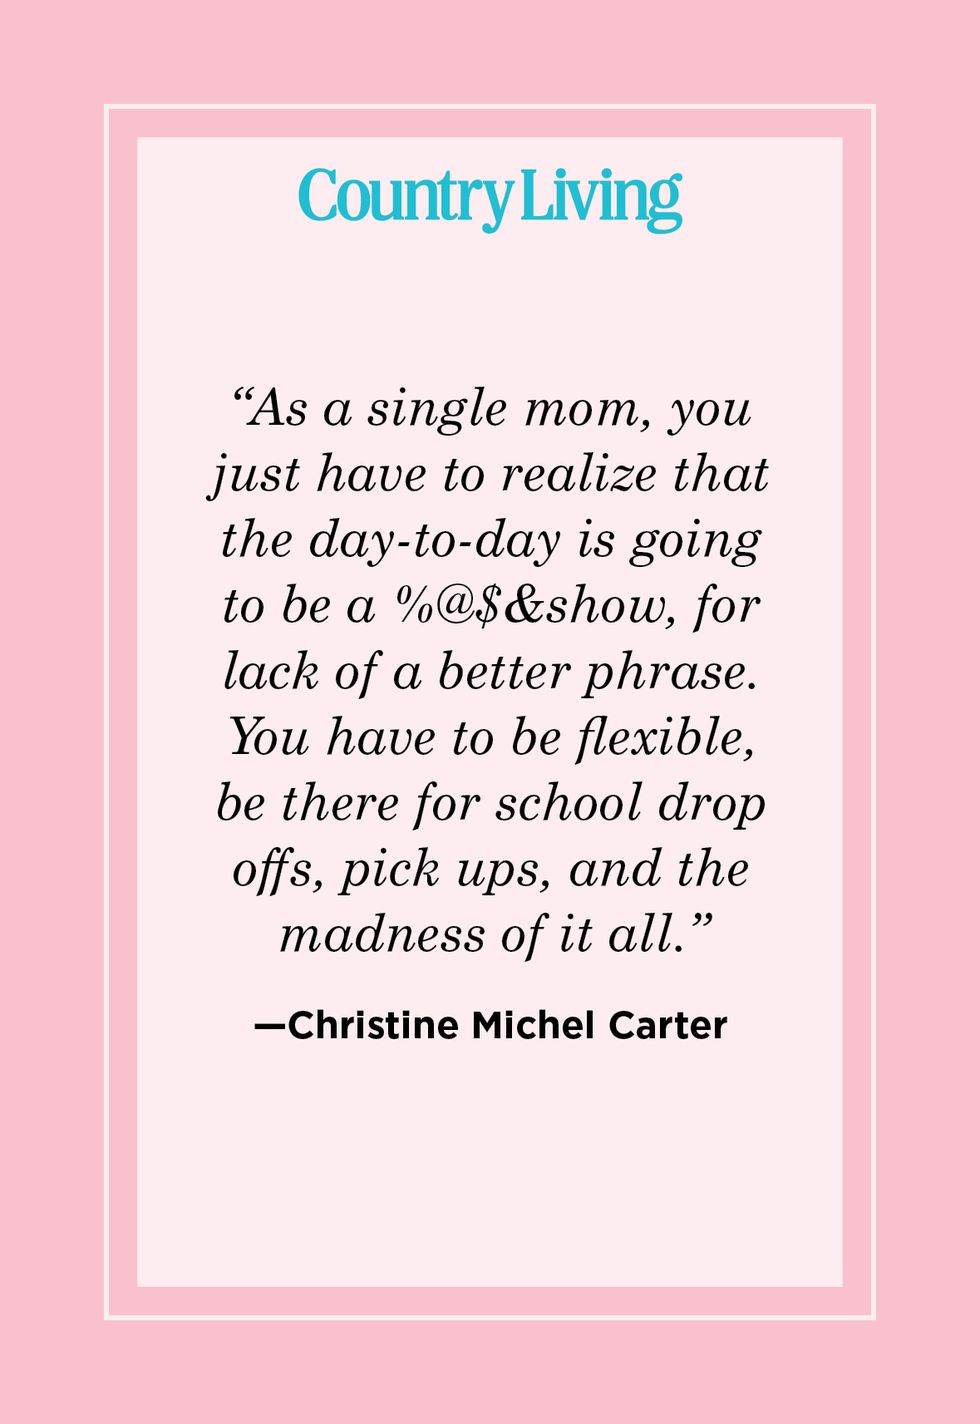 single mom quote by christine michel carter